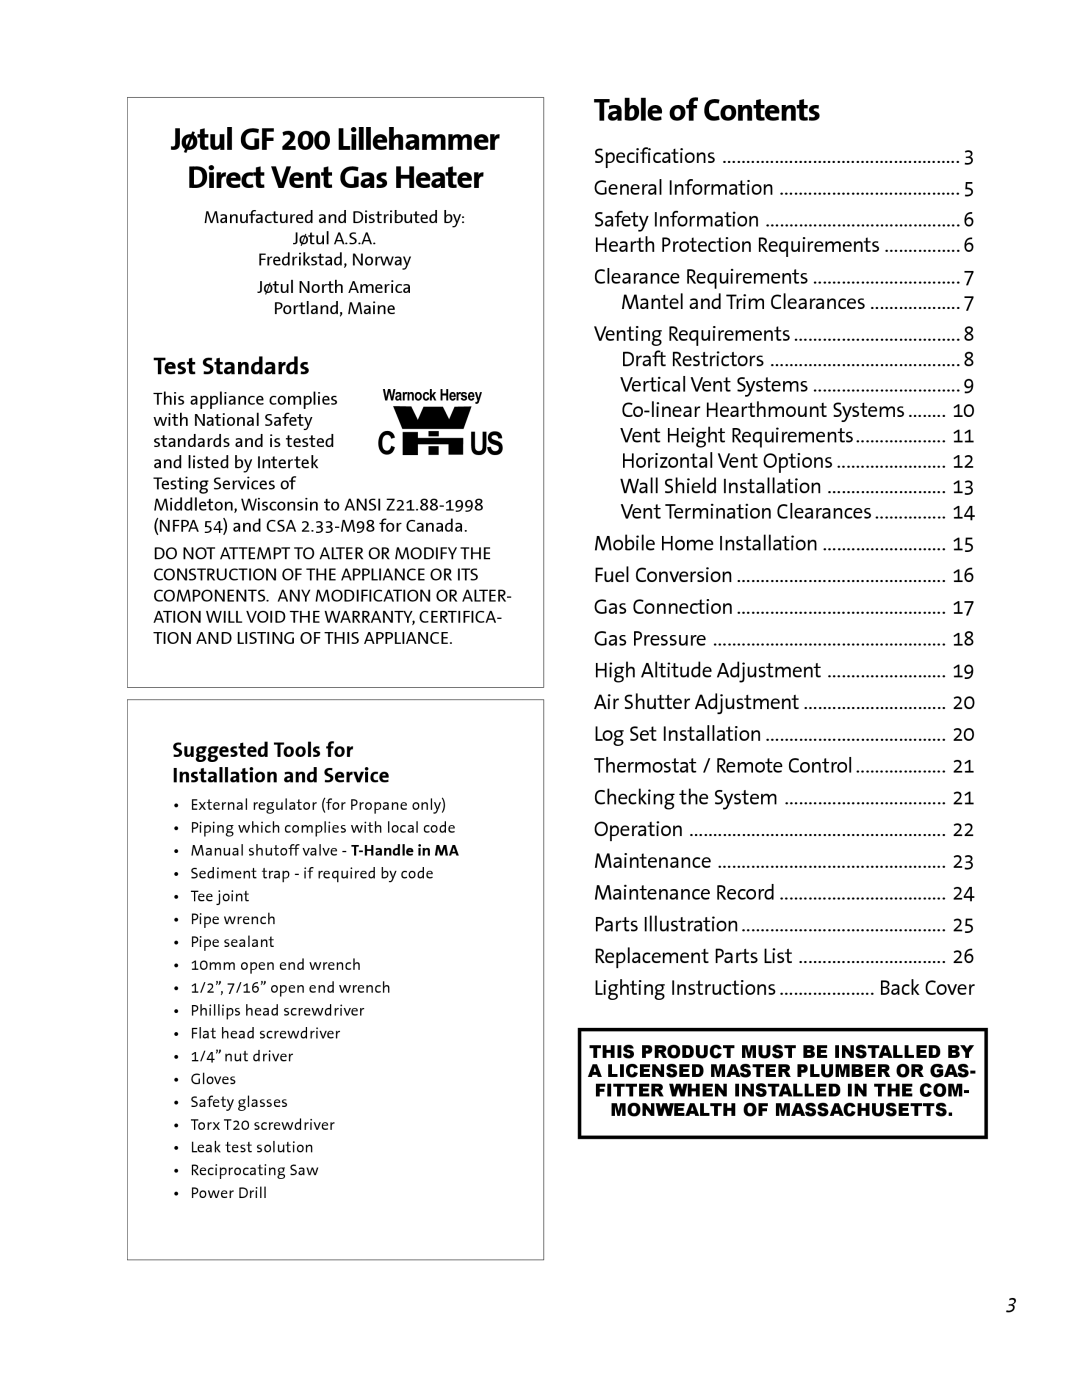 Jotul GF 200 DV manual Table of Contents, Test Standards, Suggested Tools for Installation and Service 